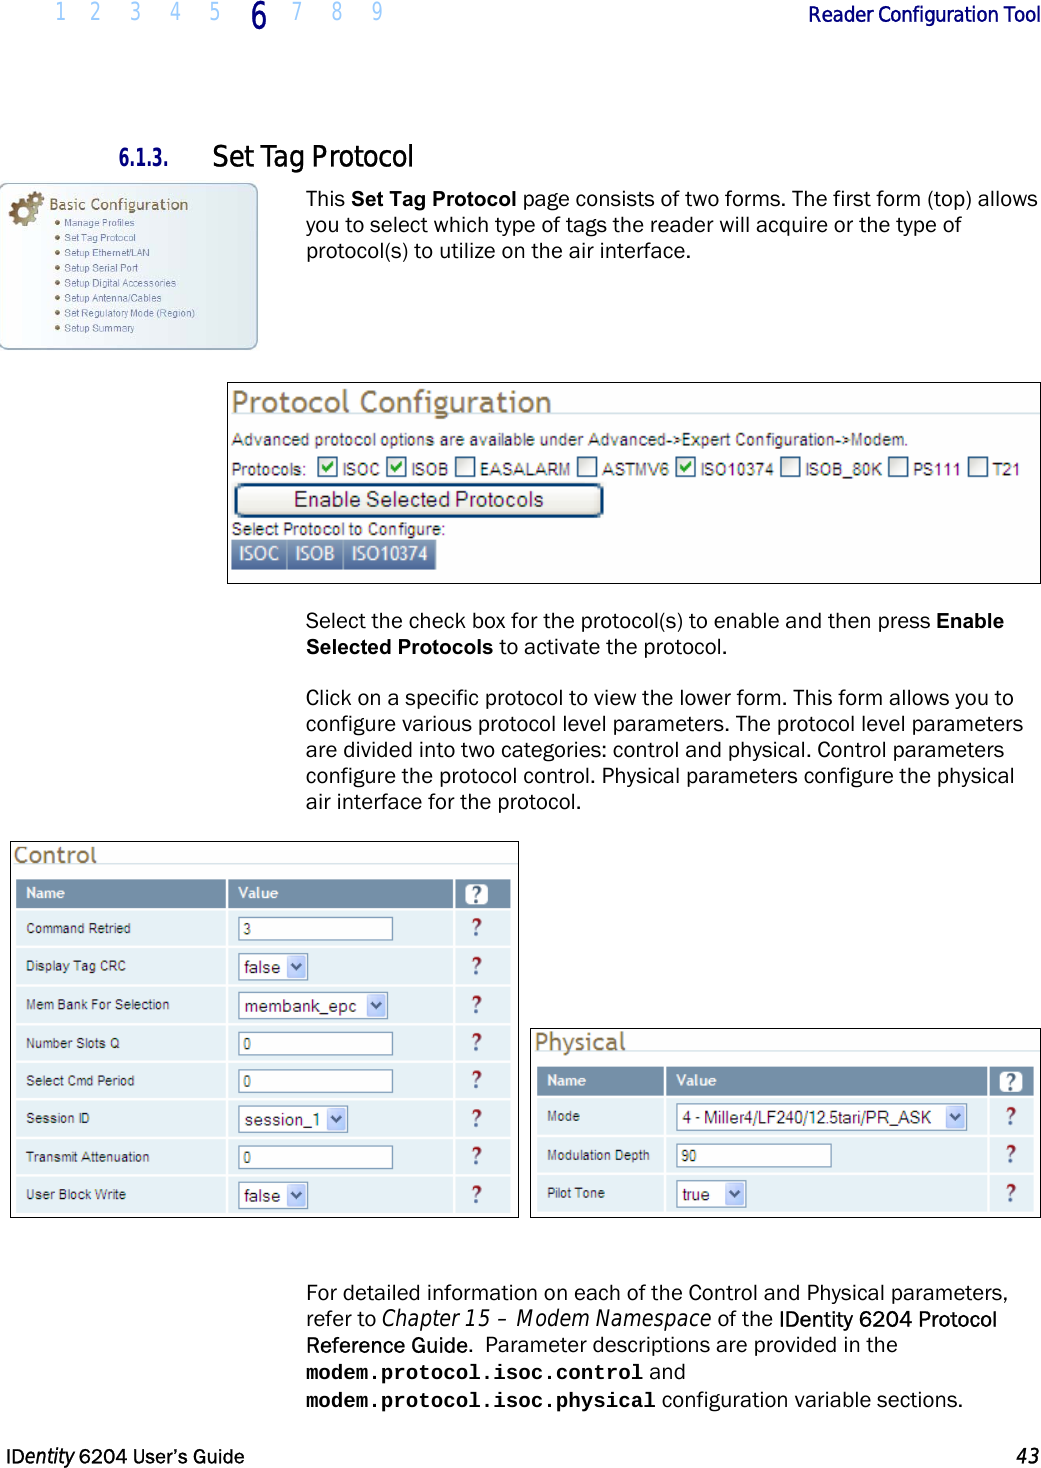  1 2 3 4 5 6  7 8 9        Reader Configuration Tool   IDentity 6204 User’s Guide  43  6.1.3. Set Tag Protocol This Set Tag Protocol page consists of two forms. The first form (top) allows you to select which type of tags the reader will acquire or the type of protocol(s) to utilize on the air interface.       Select the check box for the protocol(s) to enable and then press Enable Selected Protocols to activate the protocol. Click on a specific protocol to view the lower form. This form allows you to configure various protocol level parameters. The protocol level parameters are divided into two categories: control and physical. Control parameters configure the protocol control. Physical parameters configure the physical air interface for the protocol.      For detailed information on each of the Control and Physical parameters, refer to Chapter 15 – Modem Namespace of the IDentity 6204 Protocol Reference Guide.  Parameter descriptions are provided in the modem.protocol.isoc.control and modem.protocol.isoc.physical configuration variable sections. 